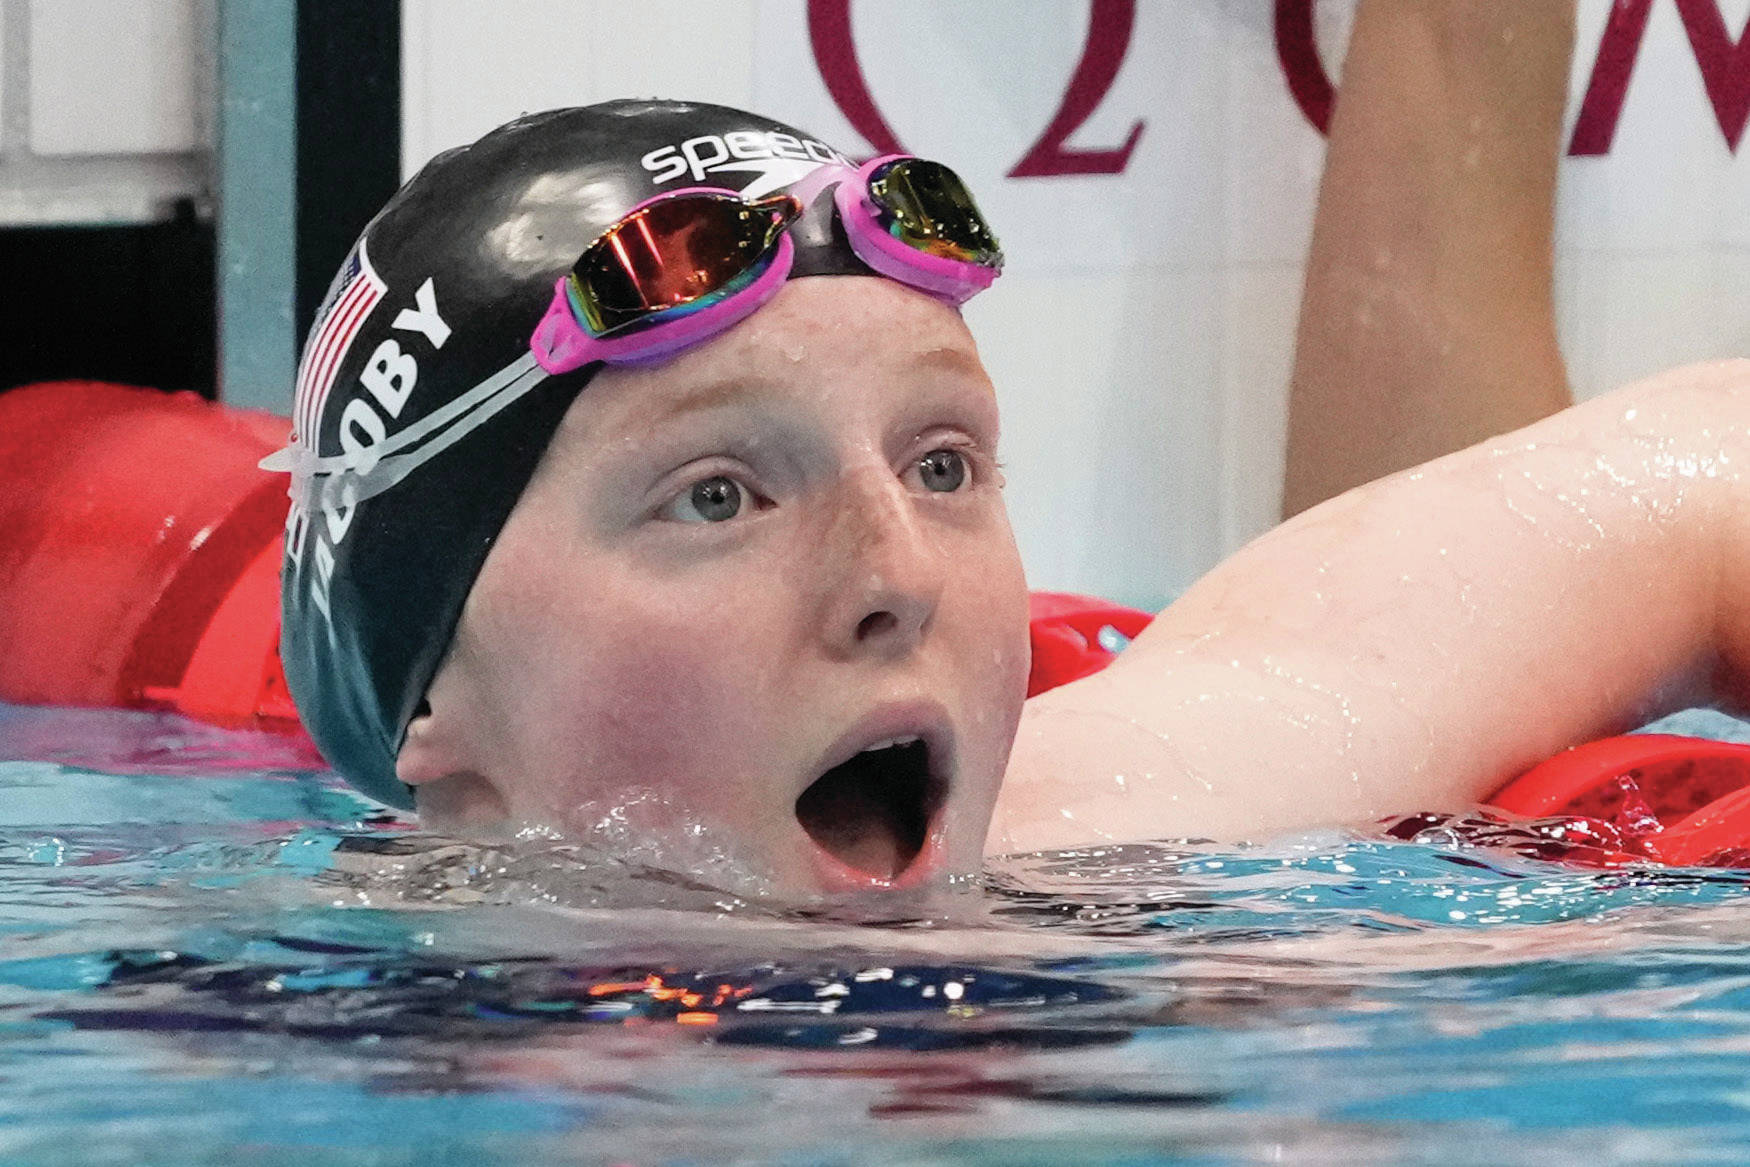 AP Photos / Petr David Josek
Lydia Jacoby, of the United States, reacts Tuesday after winning the final of the women’s 100-meter breaststroke at the 2020 Summer Olympics in Tokyo.